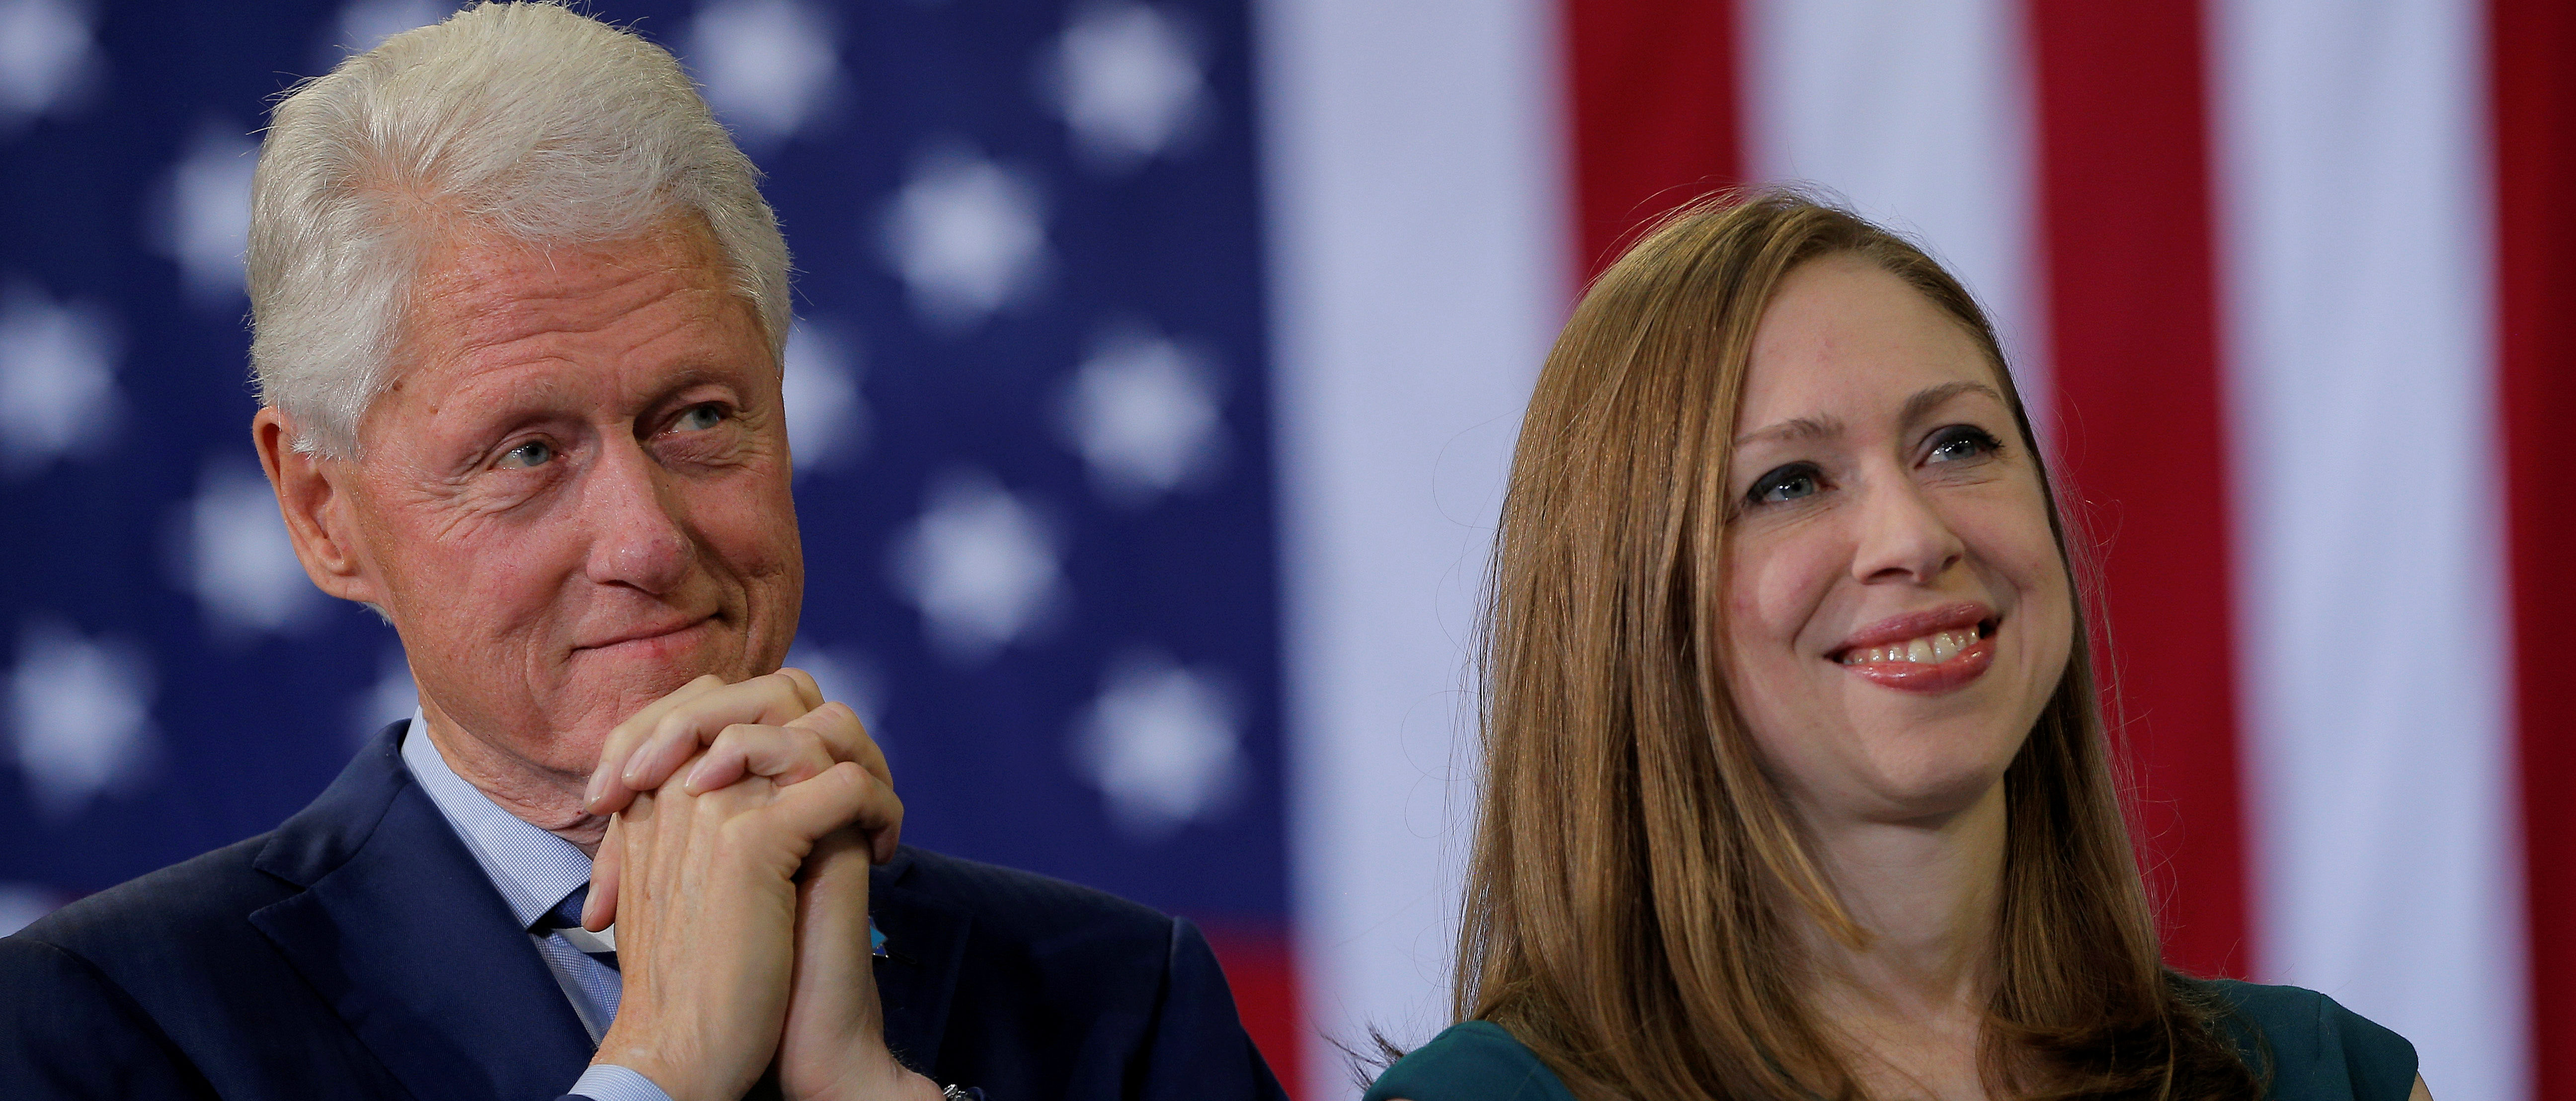 Former U.S. President Bill Clinton and Chelsea Clinton listen as U.S. Democratic presidential nominee Hillary Clinton speaks at a campaign rally in Raleigh, North Carolina, U.S. November 8, 2016. REUTERS/Brian Snyder